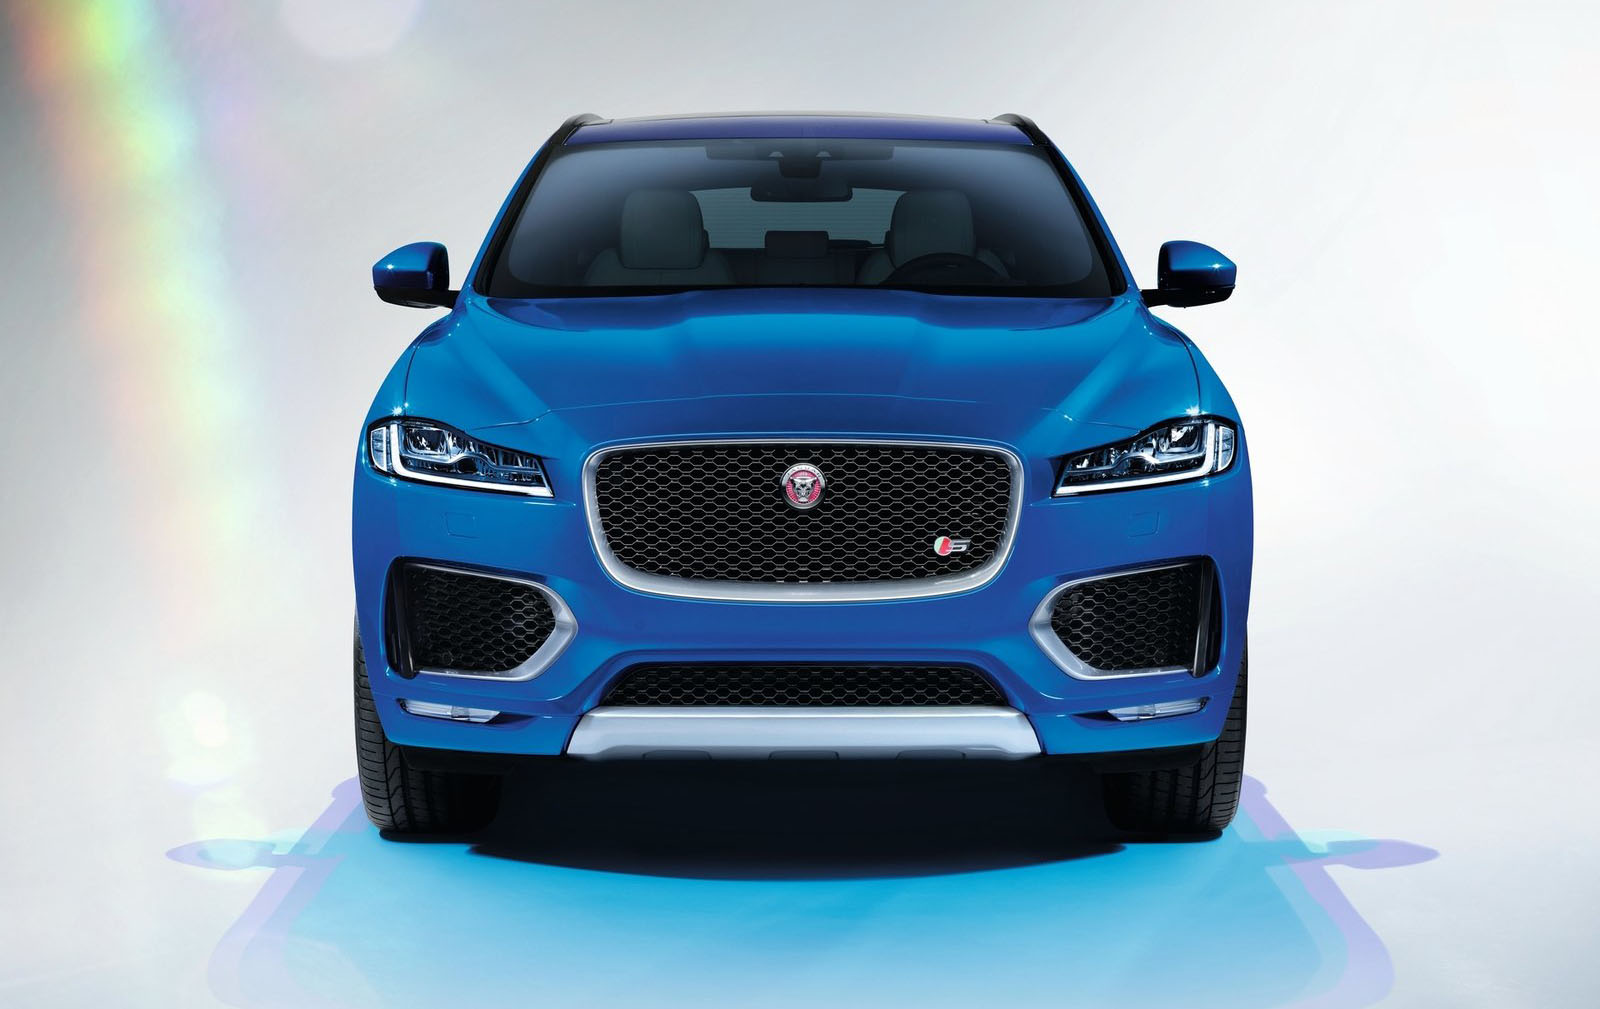 2016 Jaguar F-Pace pricing and specifications: $74,340 opener for new SUV range - photos | CarAdvice